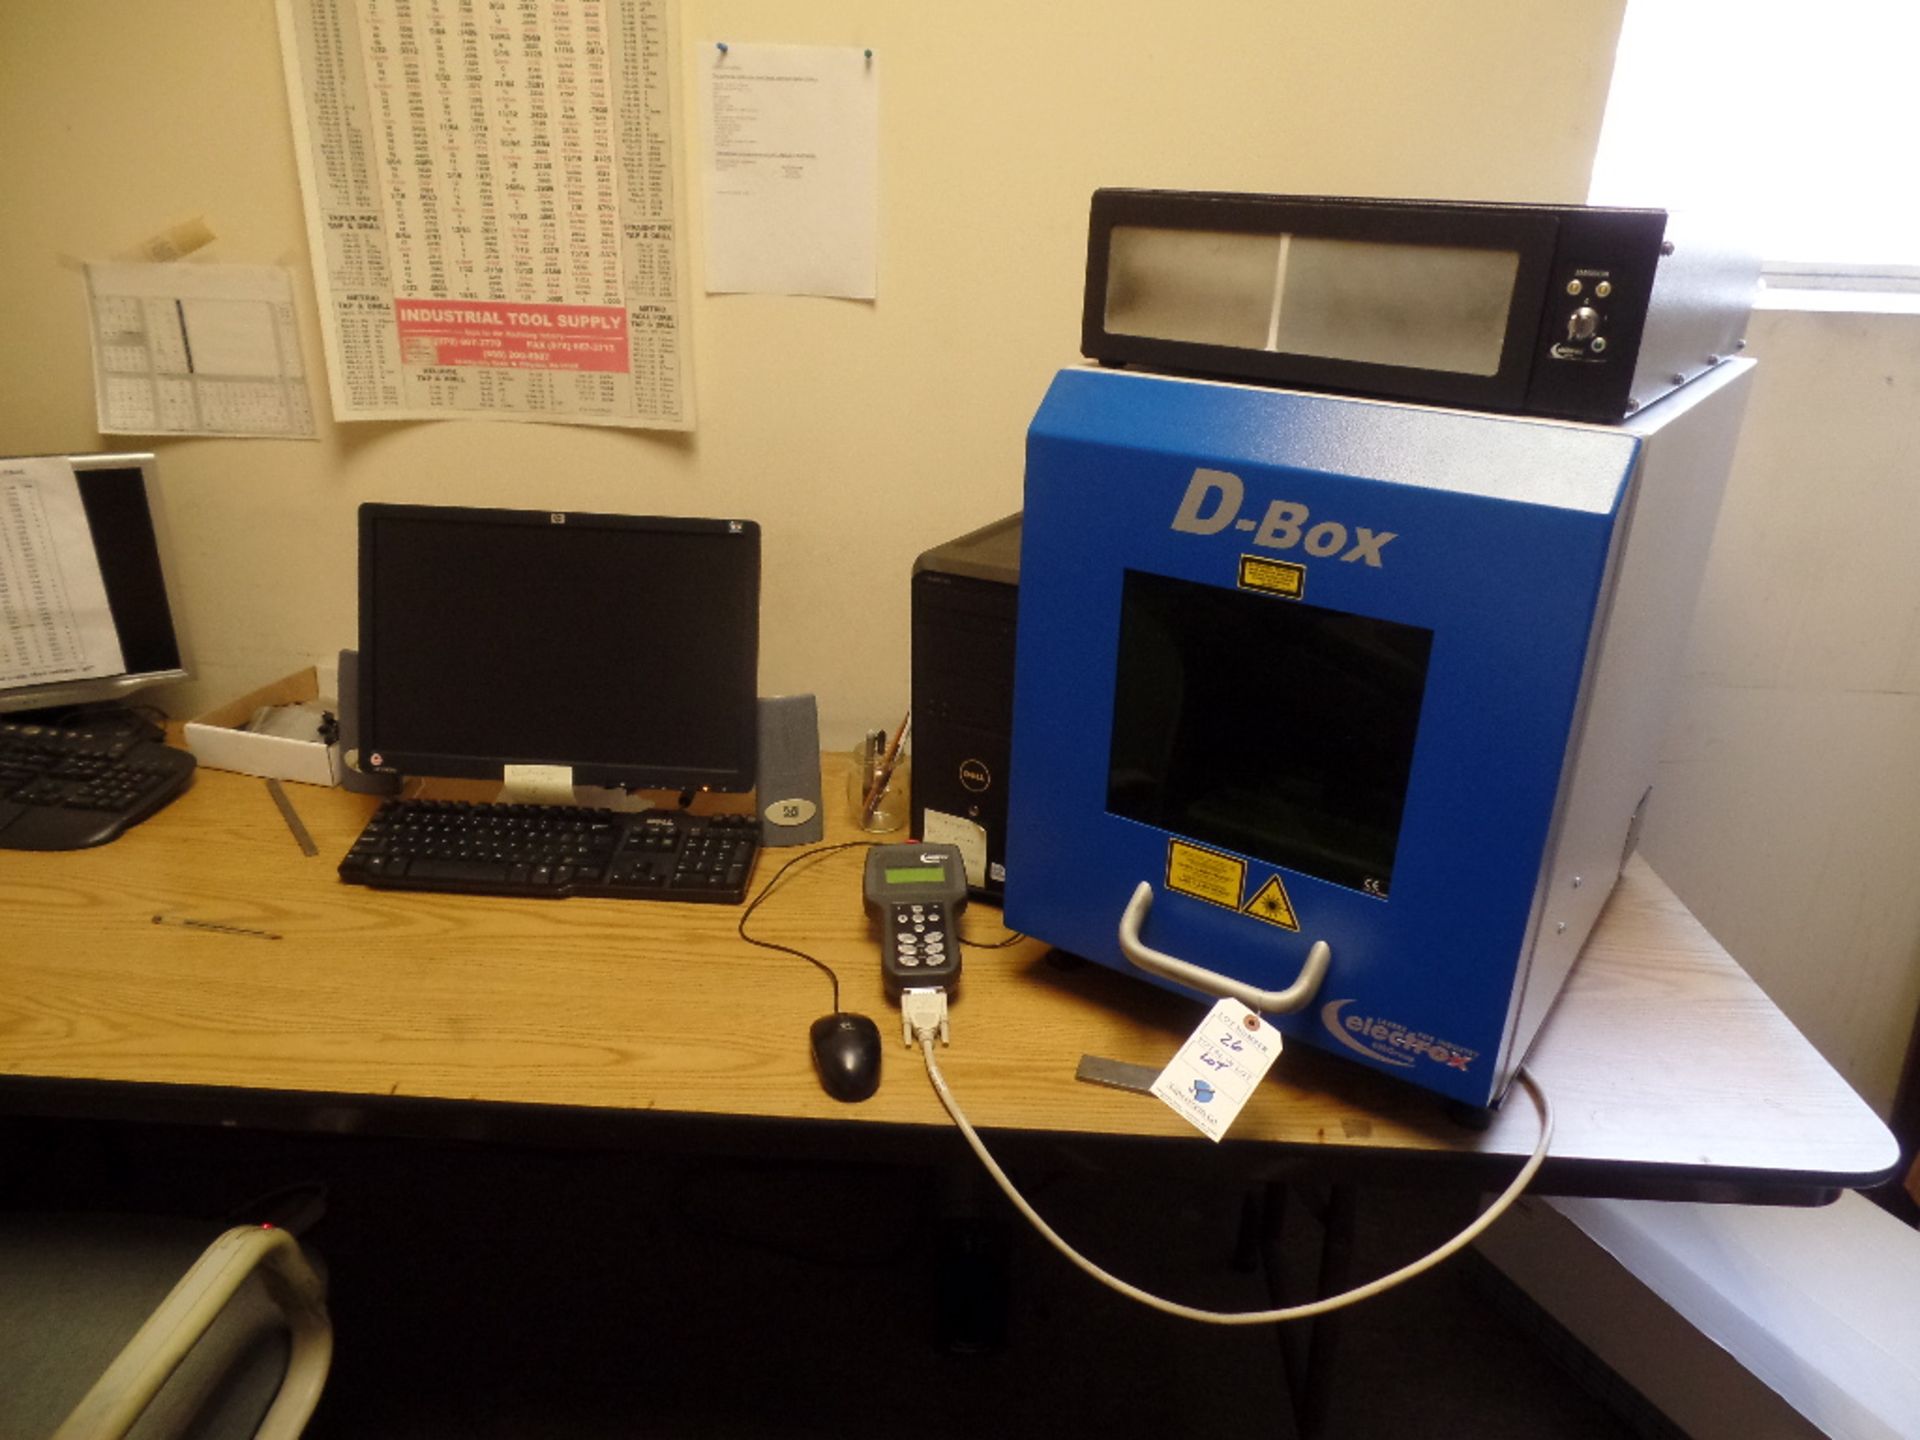 2011 Electrox #D-Box 600-Group Laser Engraving Machine (Ser#W55110) w/ PC & Software Package